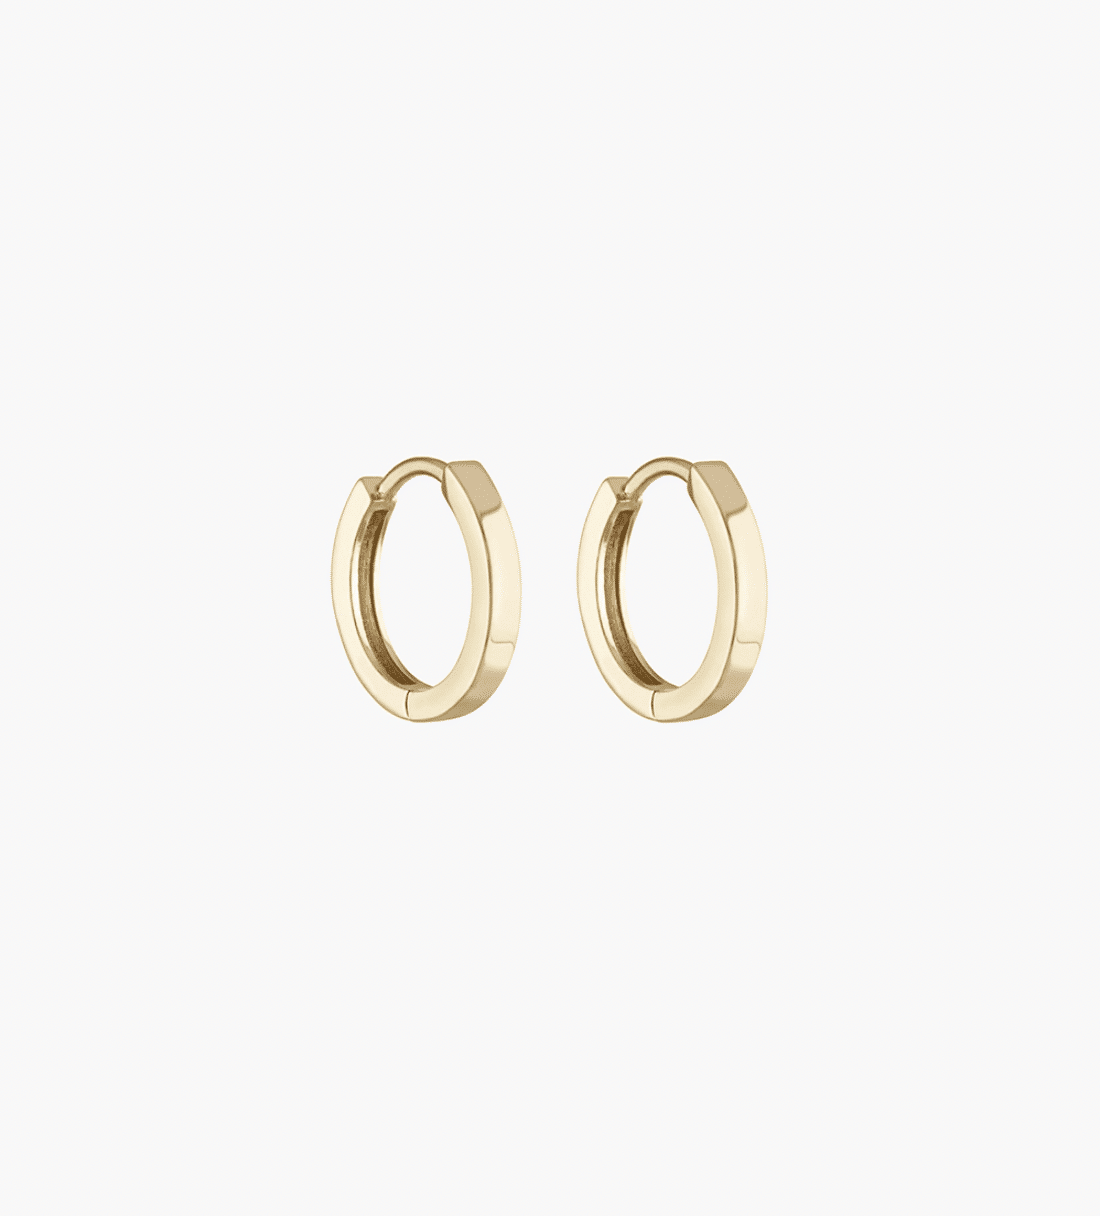 Stylish Huggie Hoop Earrings to Add to Your Jewelry Collection